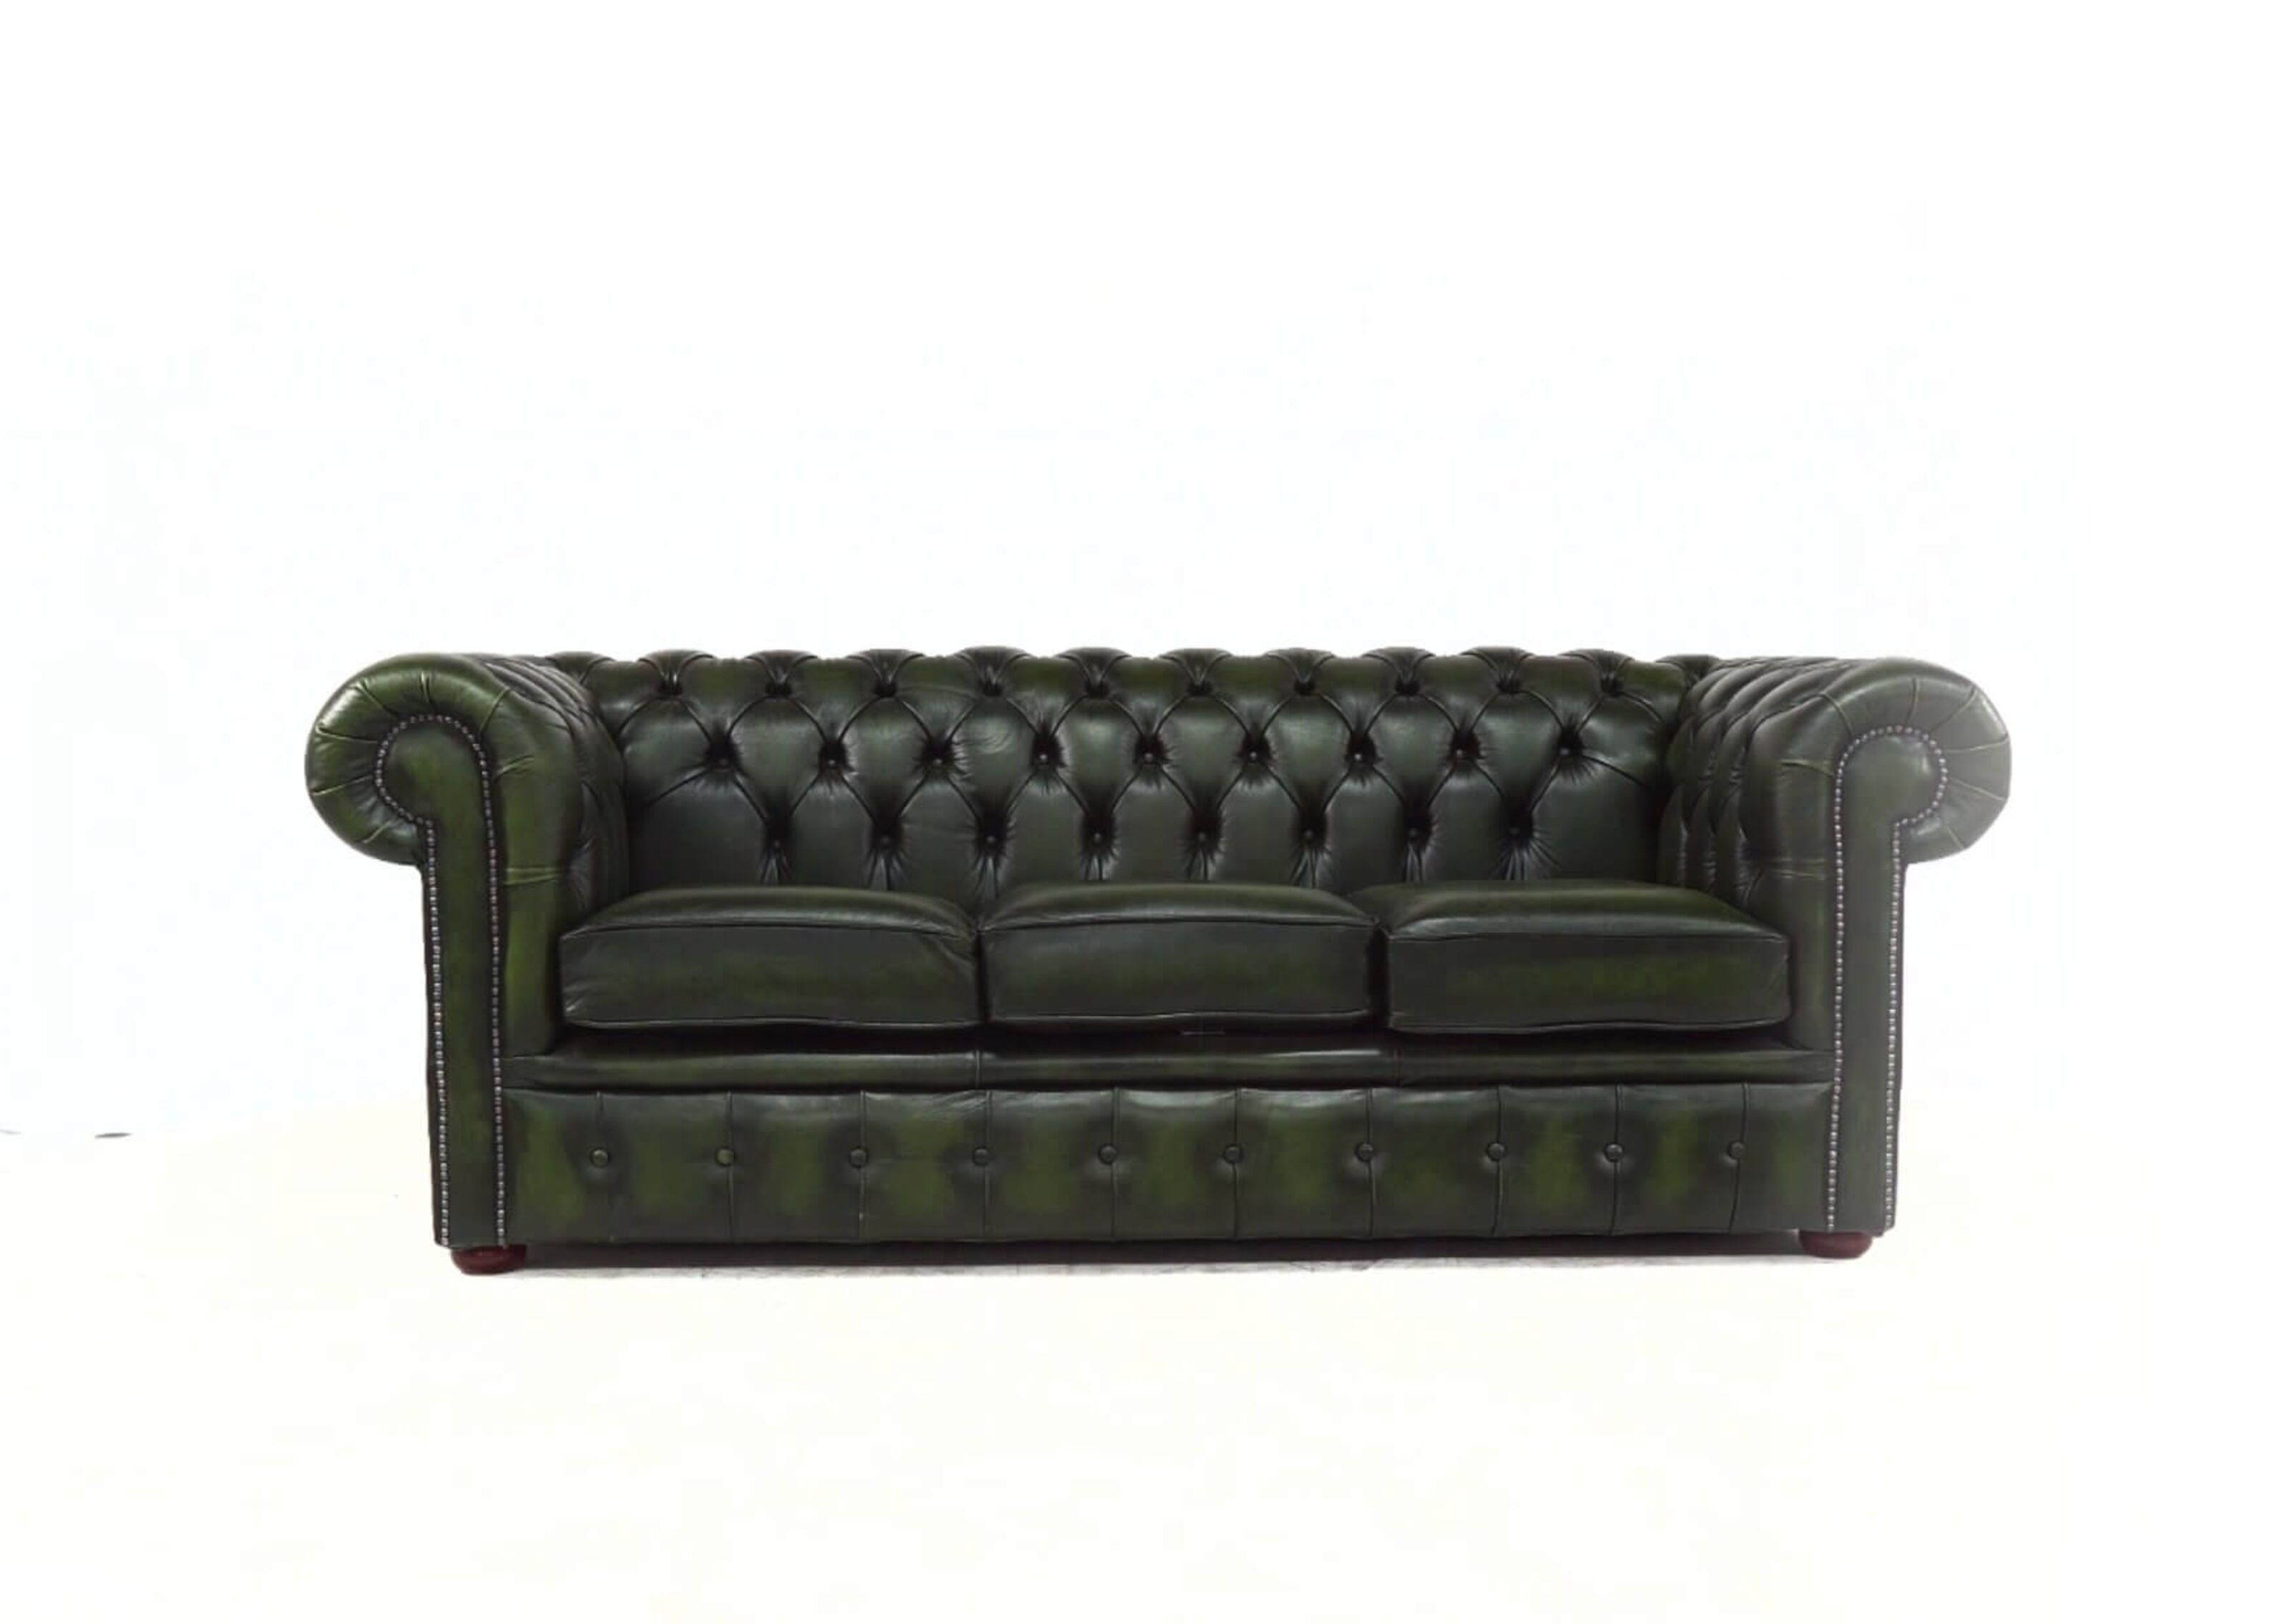 Why Everyone Loves a Chesterfield Leather Sofa  %Post Title